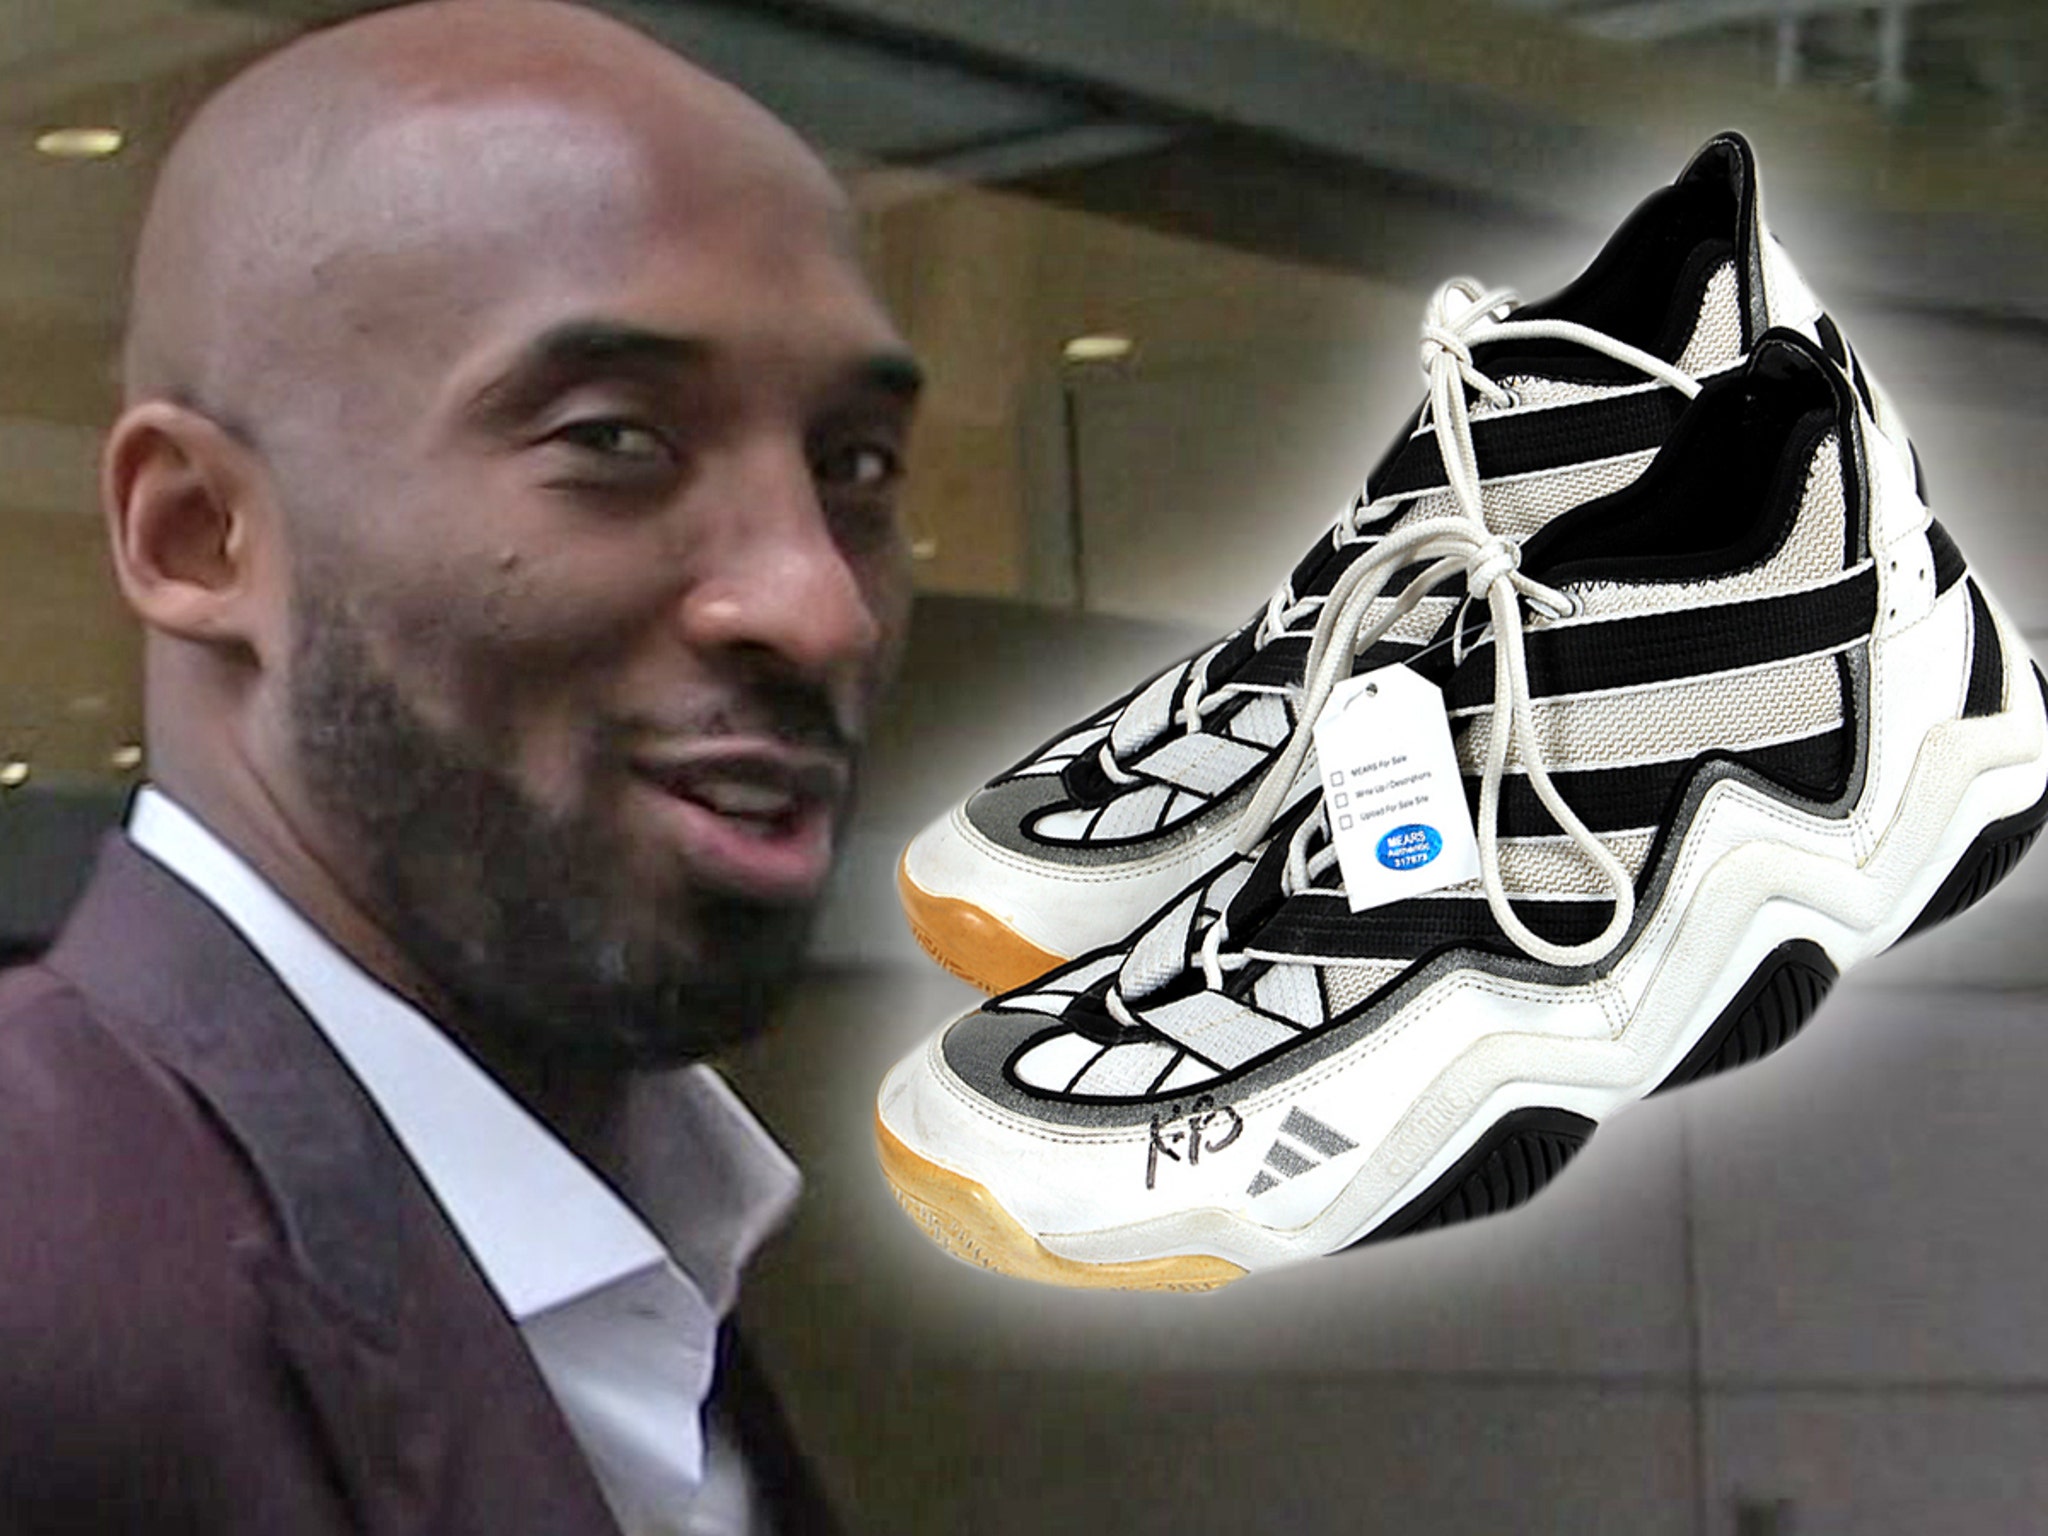 Kobe Bryant's kobe bryant new shoes Signed NBA Debut Sneakers Hit Auction, Could Fetch